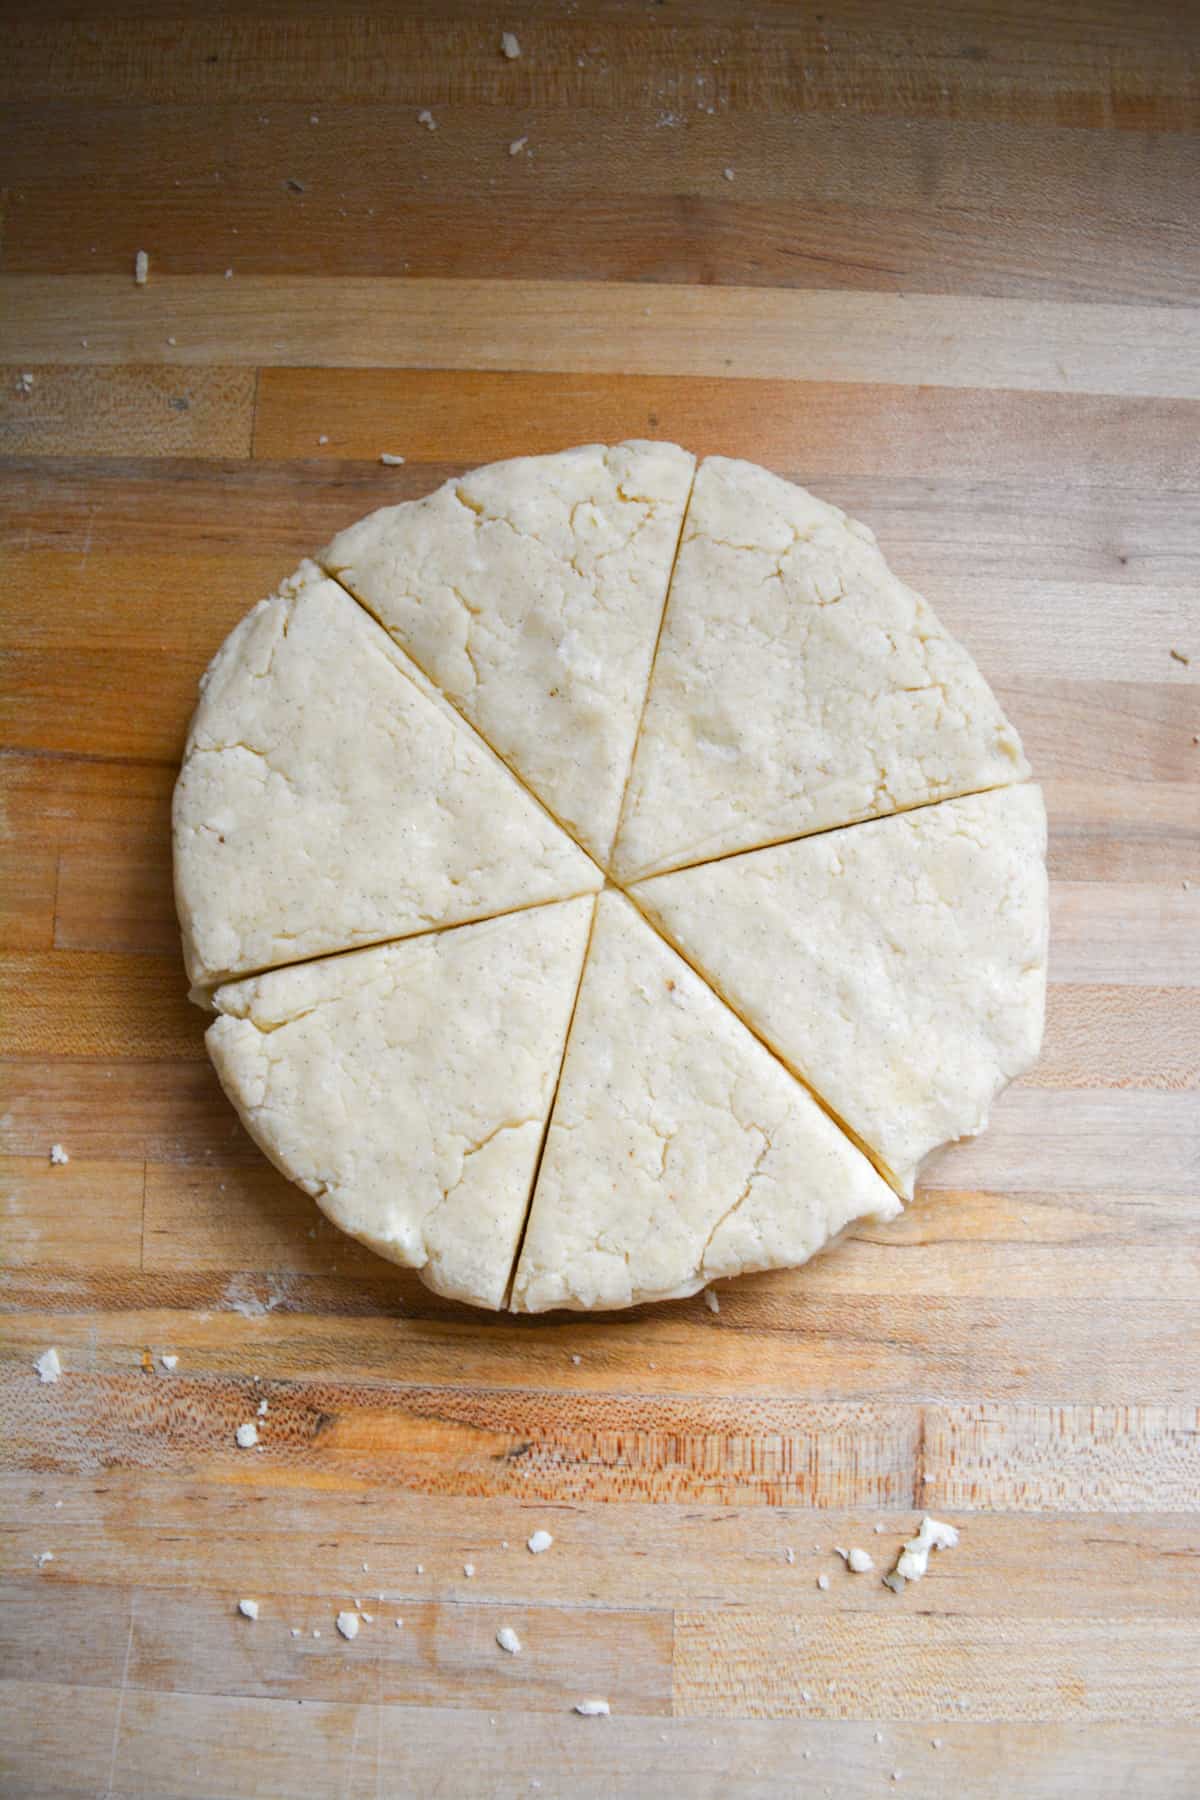 Vegan Scone dough pressed into a circle on a wooden surface and cut into 6 triangles.